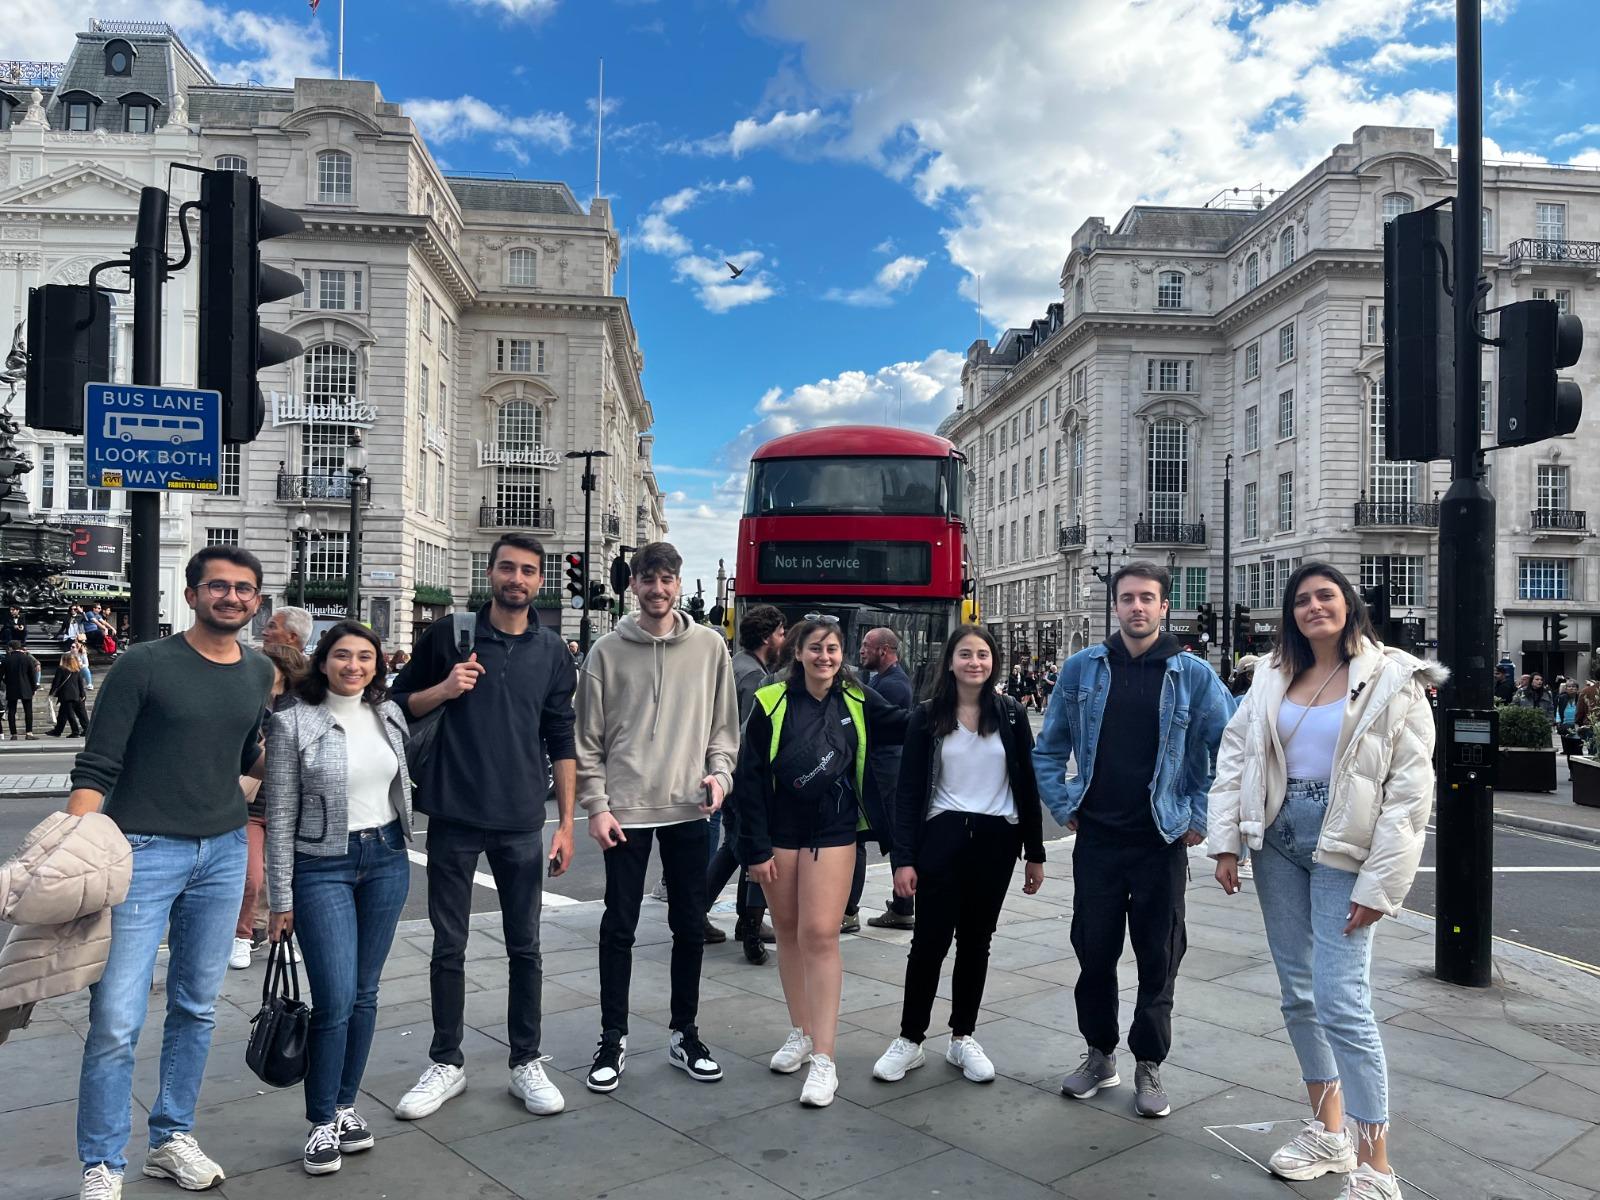 A group of people posing for a photo in front of a red double decker bus

Description automatically generated